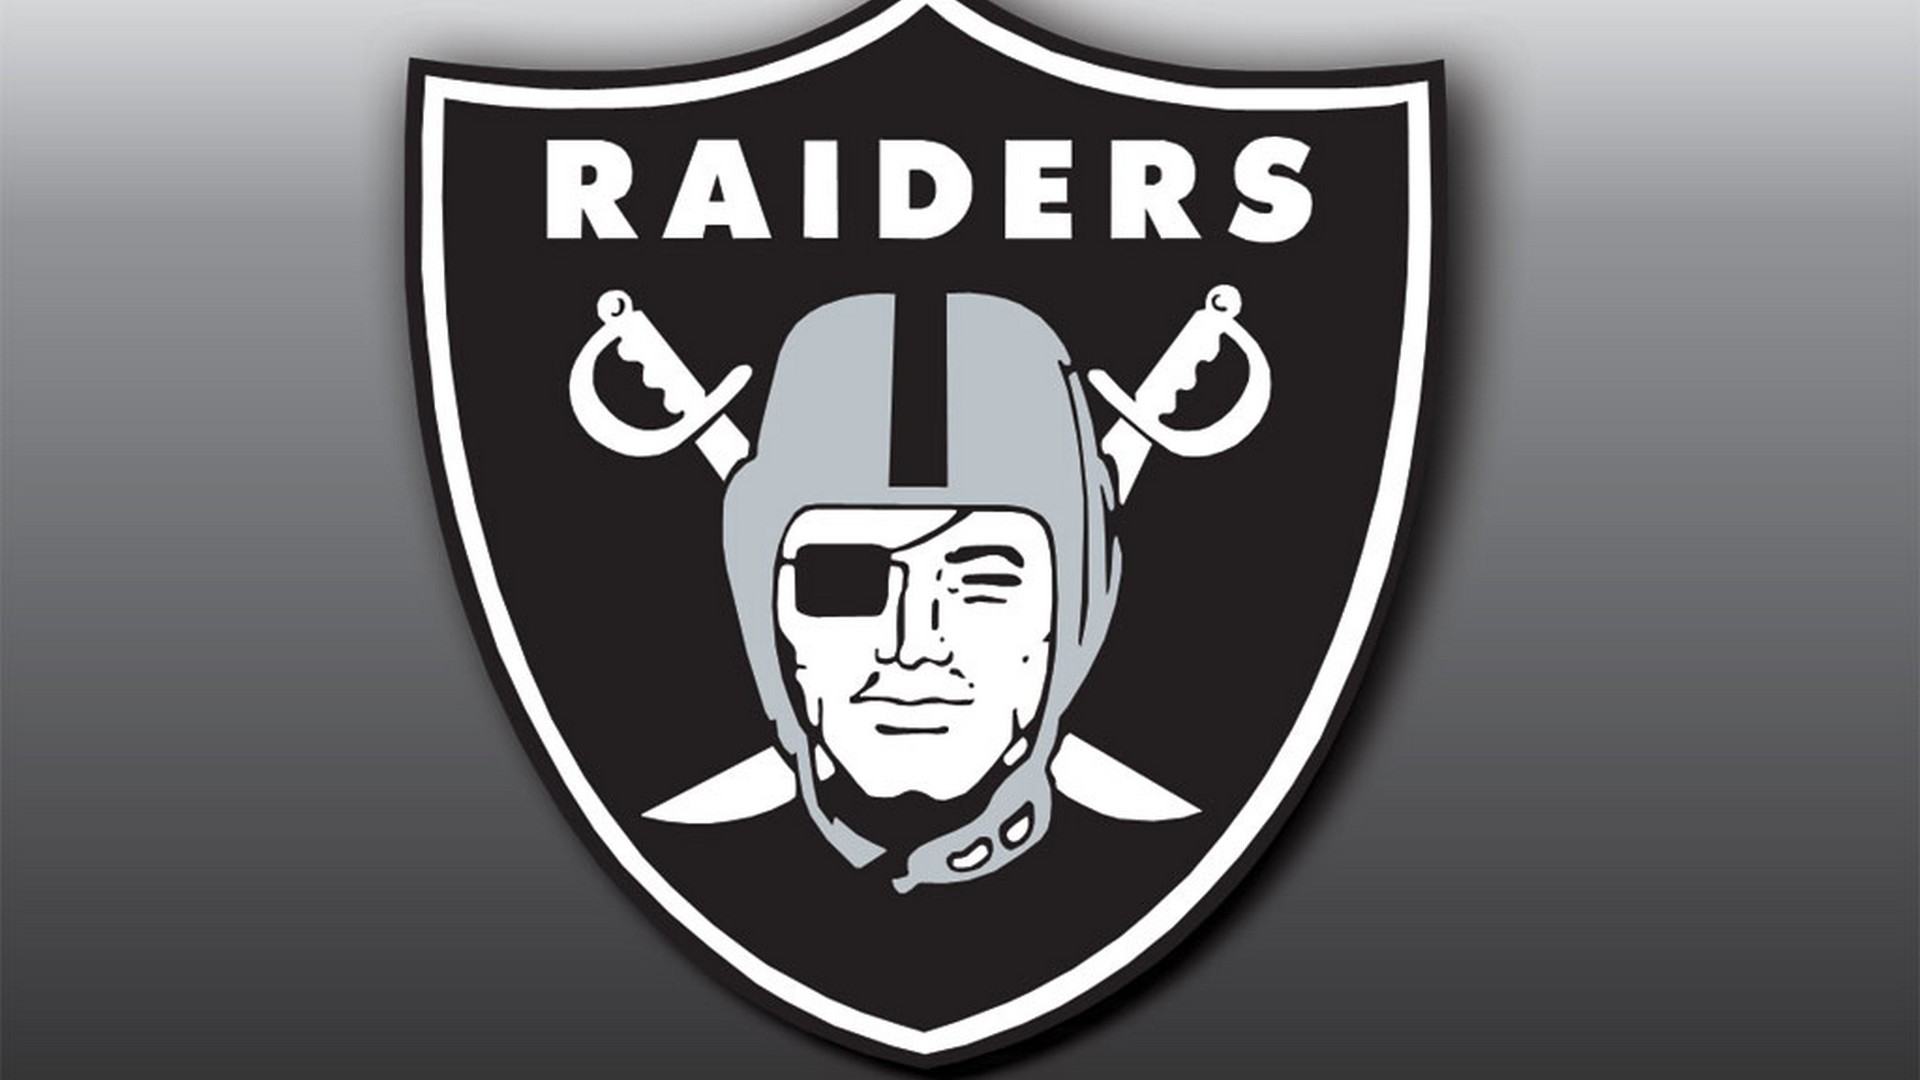 Oakland Raiders for Desktop Backgrounds with high-resolution 1920x1080 pixel. Download and set as wallpaper for Desktop Computer, Apple iPhone X, XS Max, XR, 8, 7, 6, SE, iPad, Android